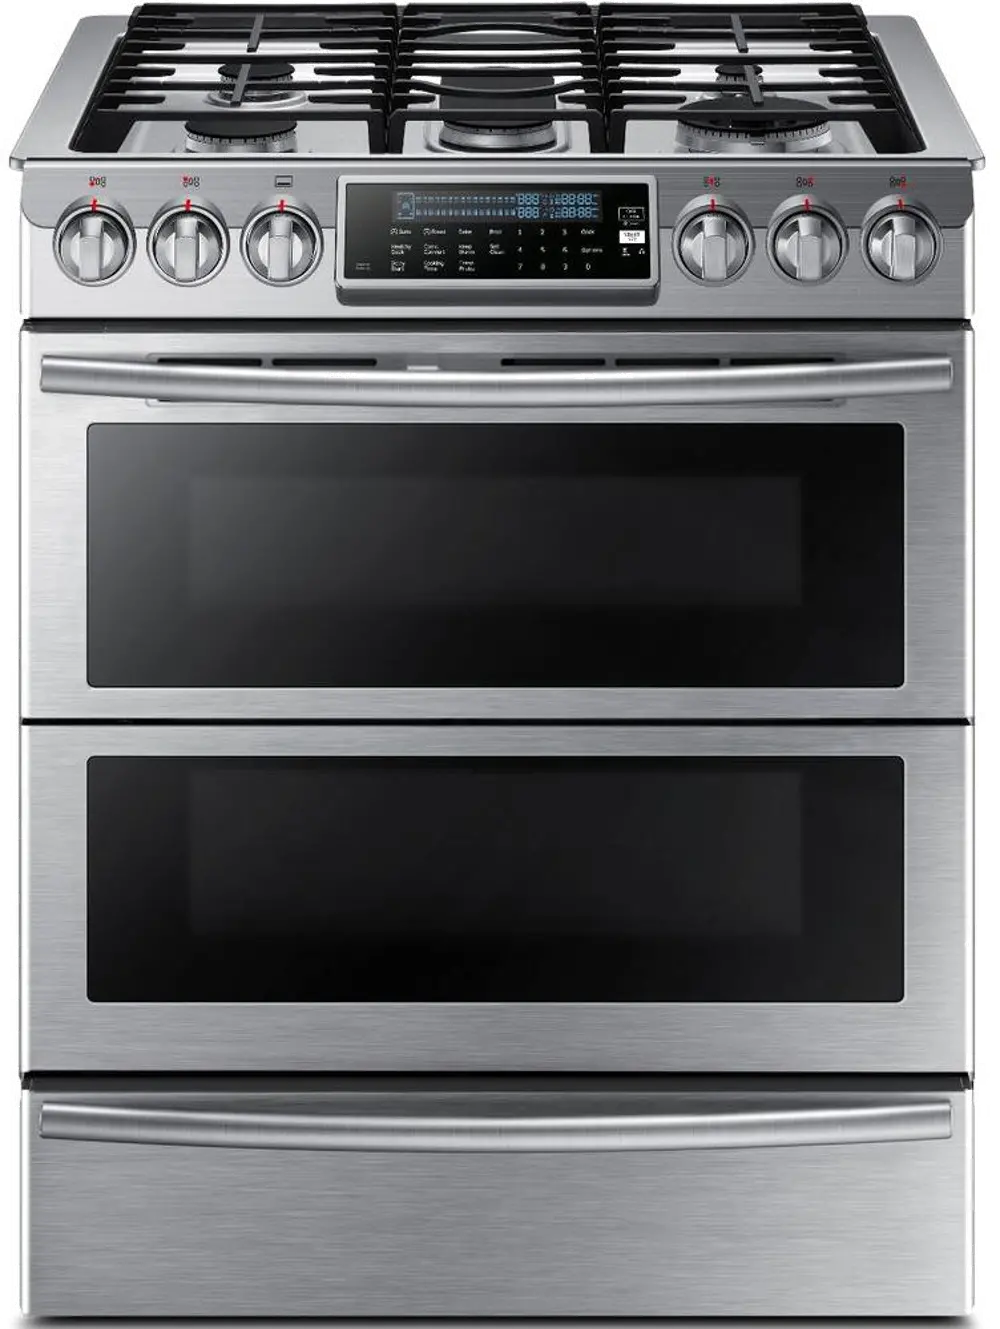 NY58J9850WS Samsung Dual Fuel Range - 5.8 cu. ft. Stainless Steel-1